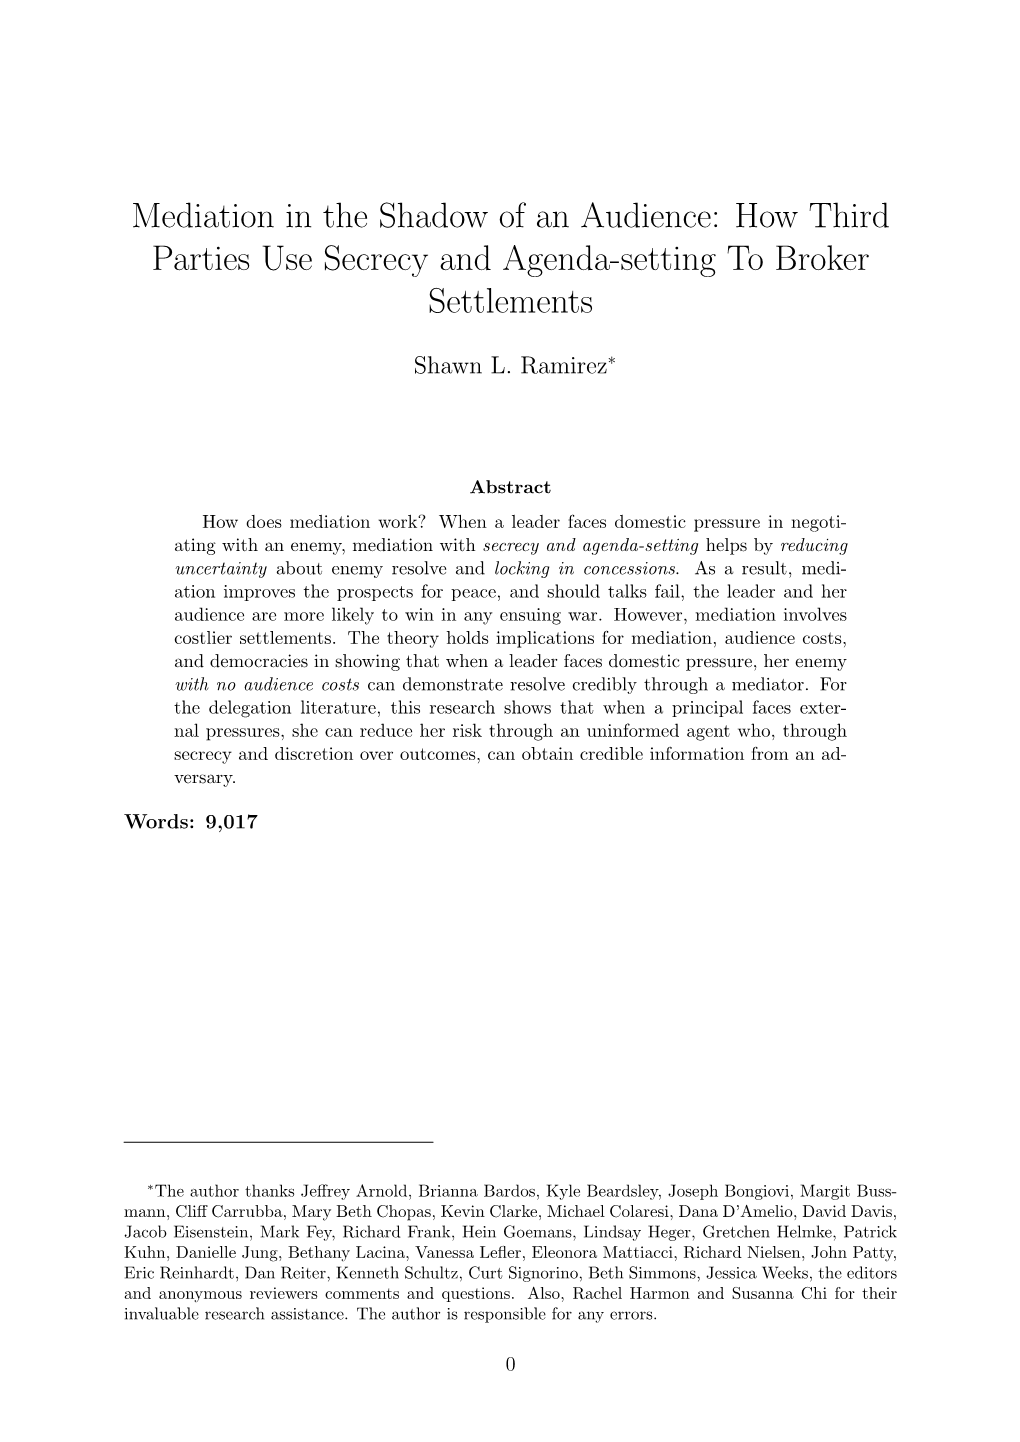 How Third Parties Use Secrecy and Agenda-Setting to Broker Settlements